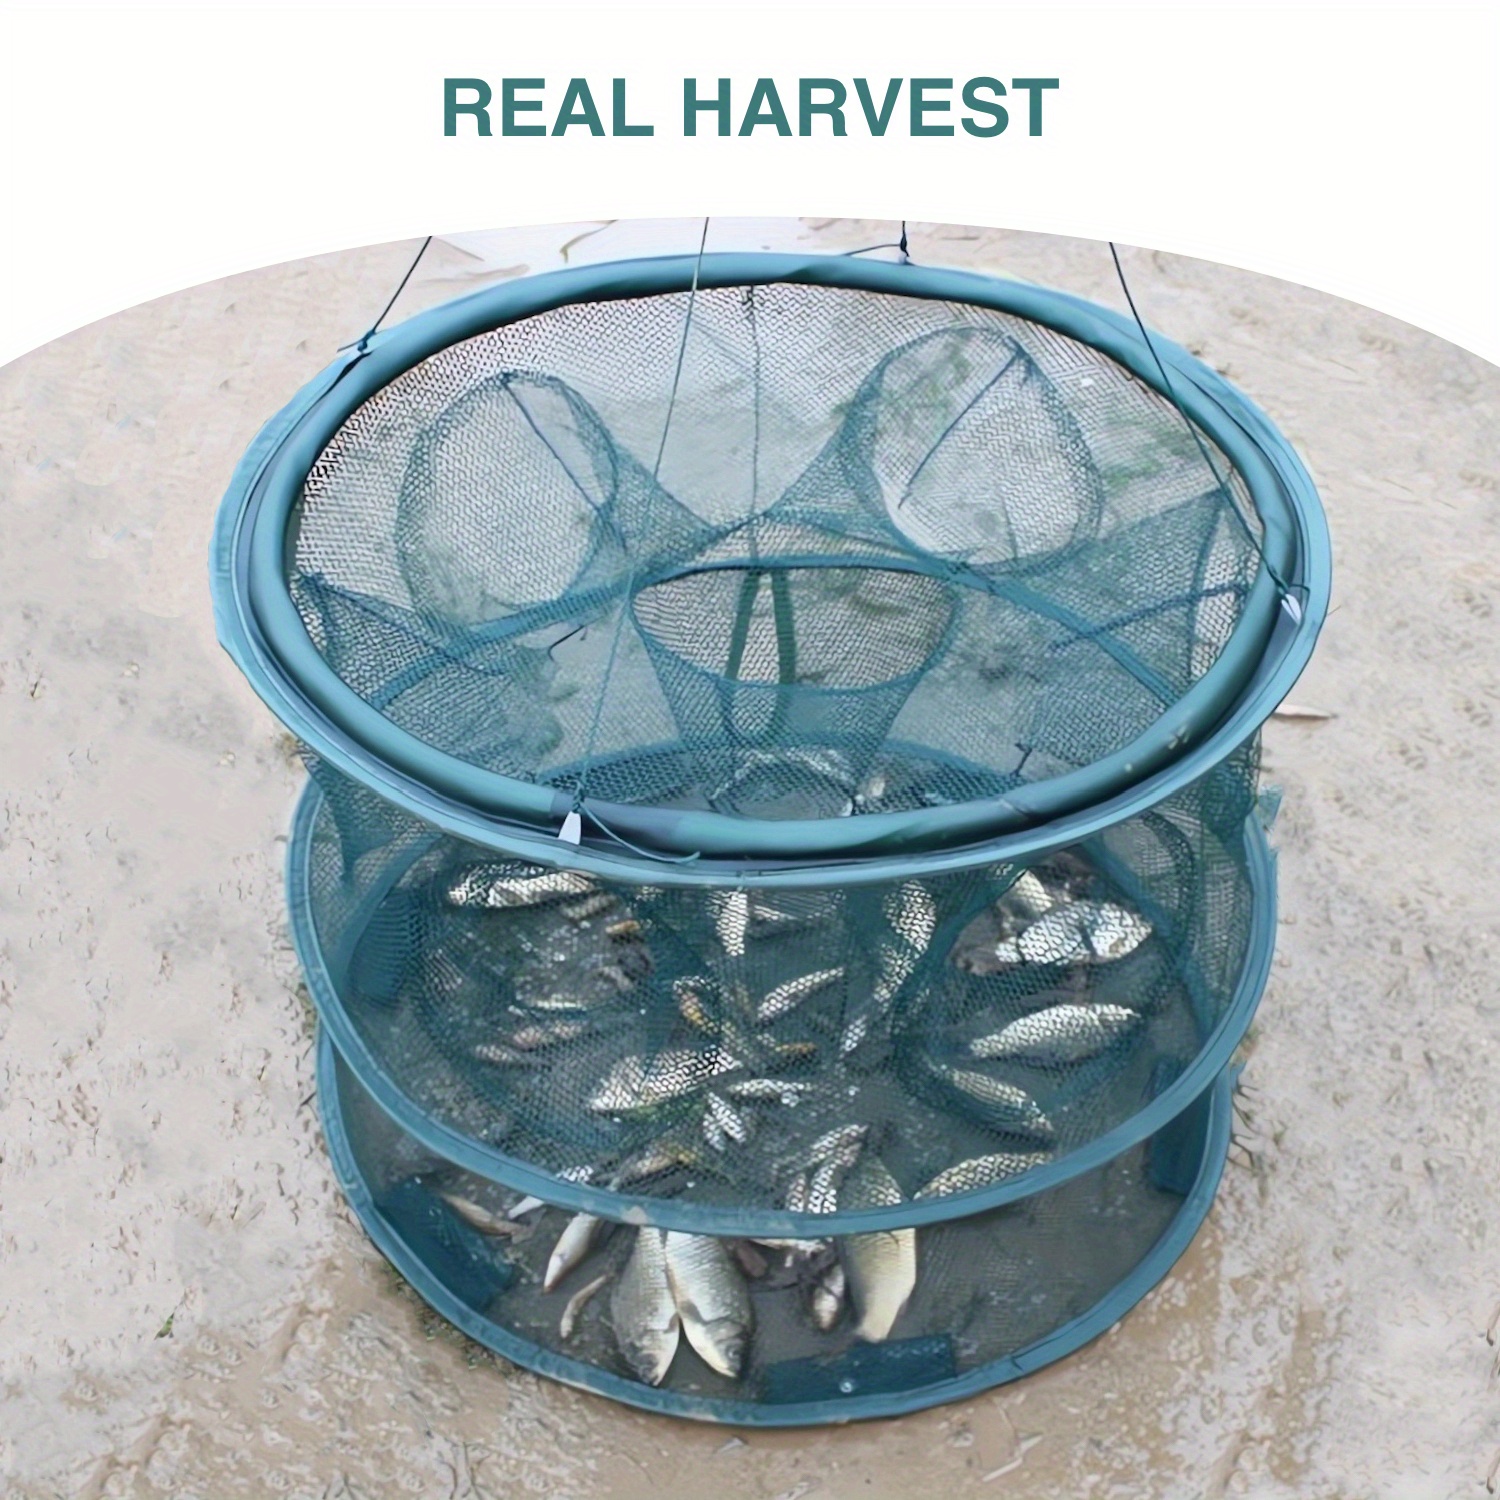  mouhike Collapsible Fish Basket Mesh Fish Trap Portable Fish  Cage Foldable Fishing Keep Net for Keeping Fish Alive, Bait Storage  Crayfish Crab Minnows Shrimps Lobsters : Sports & Outdoors